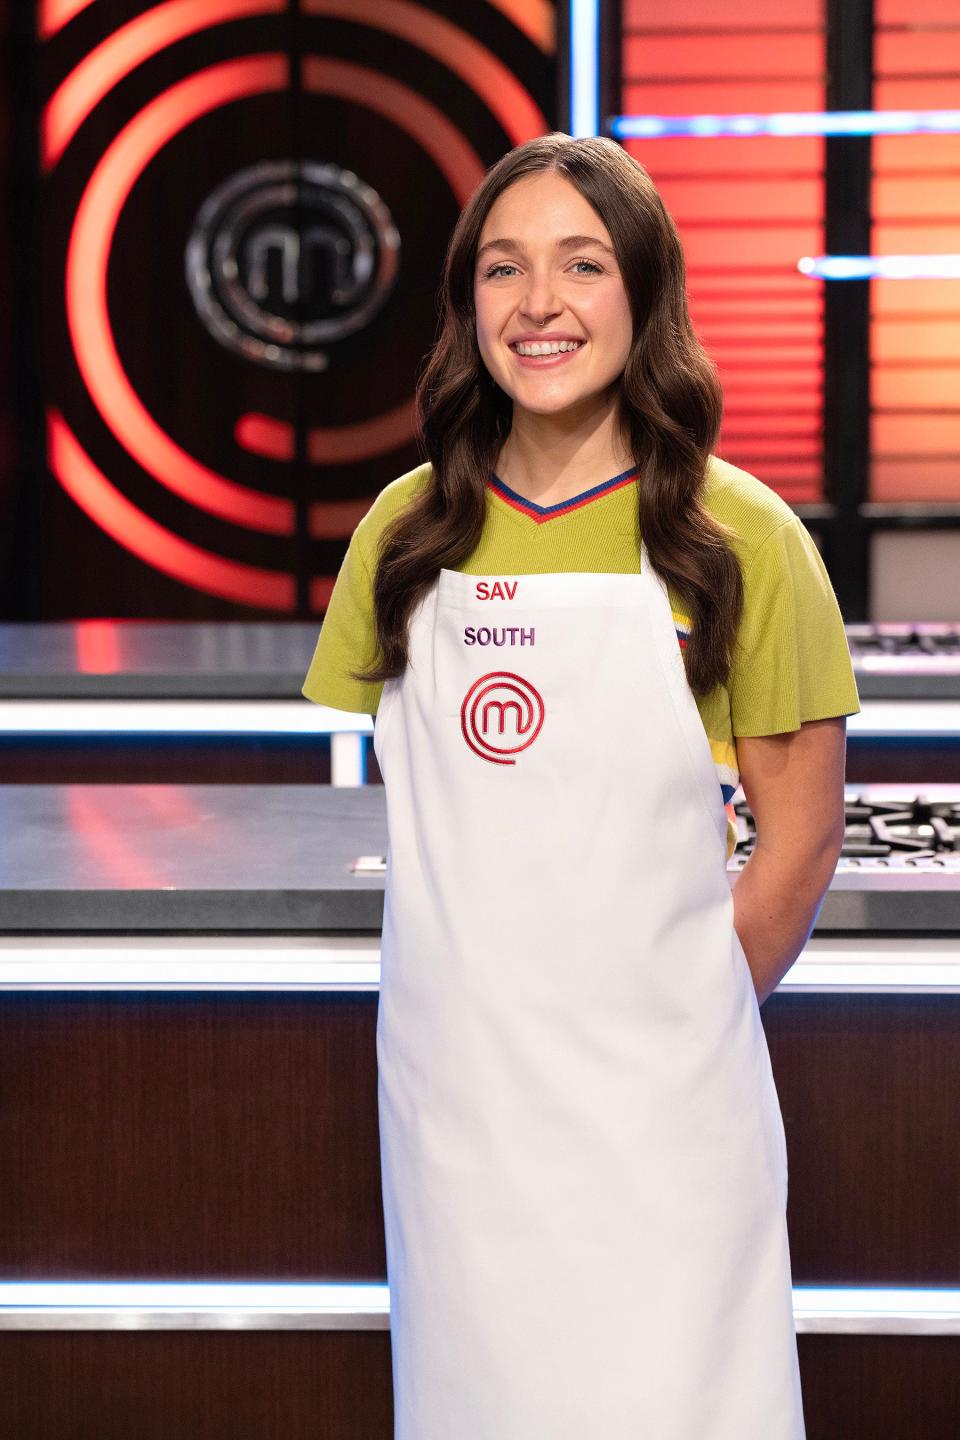 Gadsden native Savannah Miles is competing on the 2023 season of Fox's “MasterChef,” representing the South.